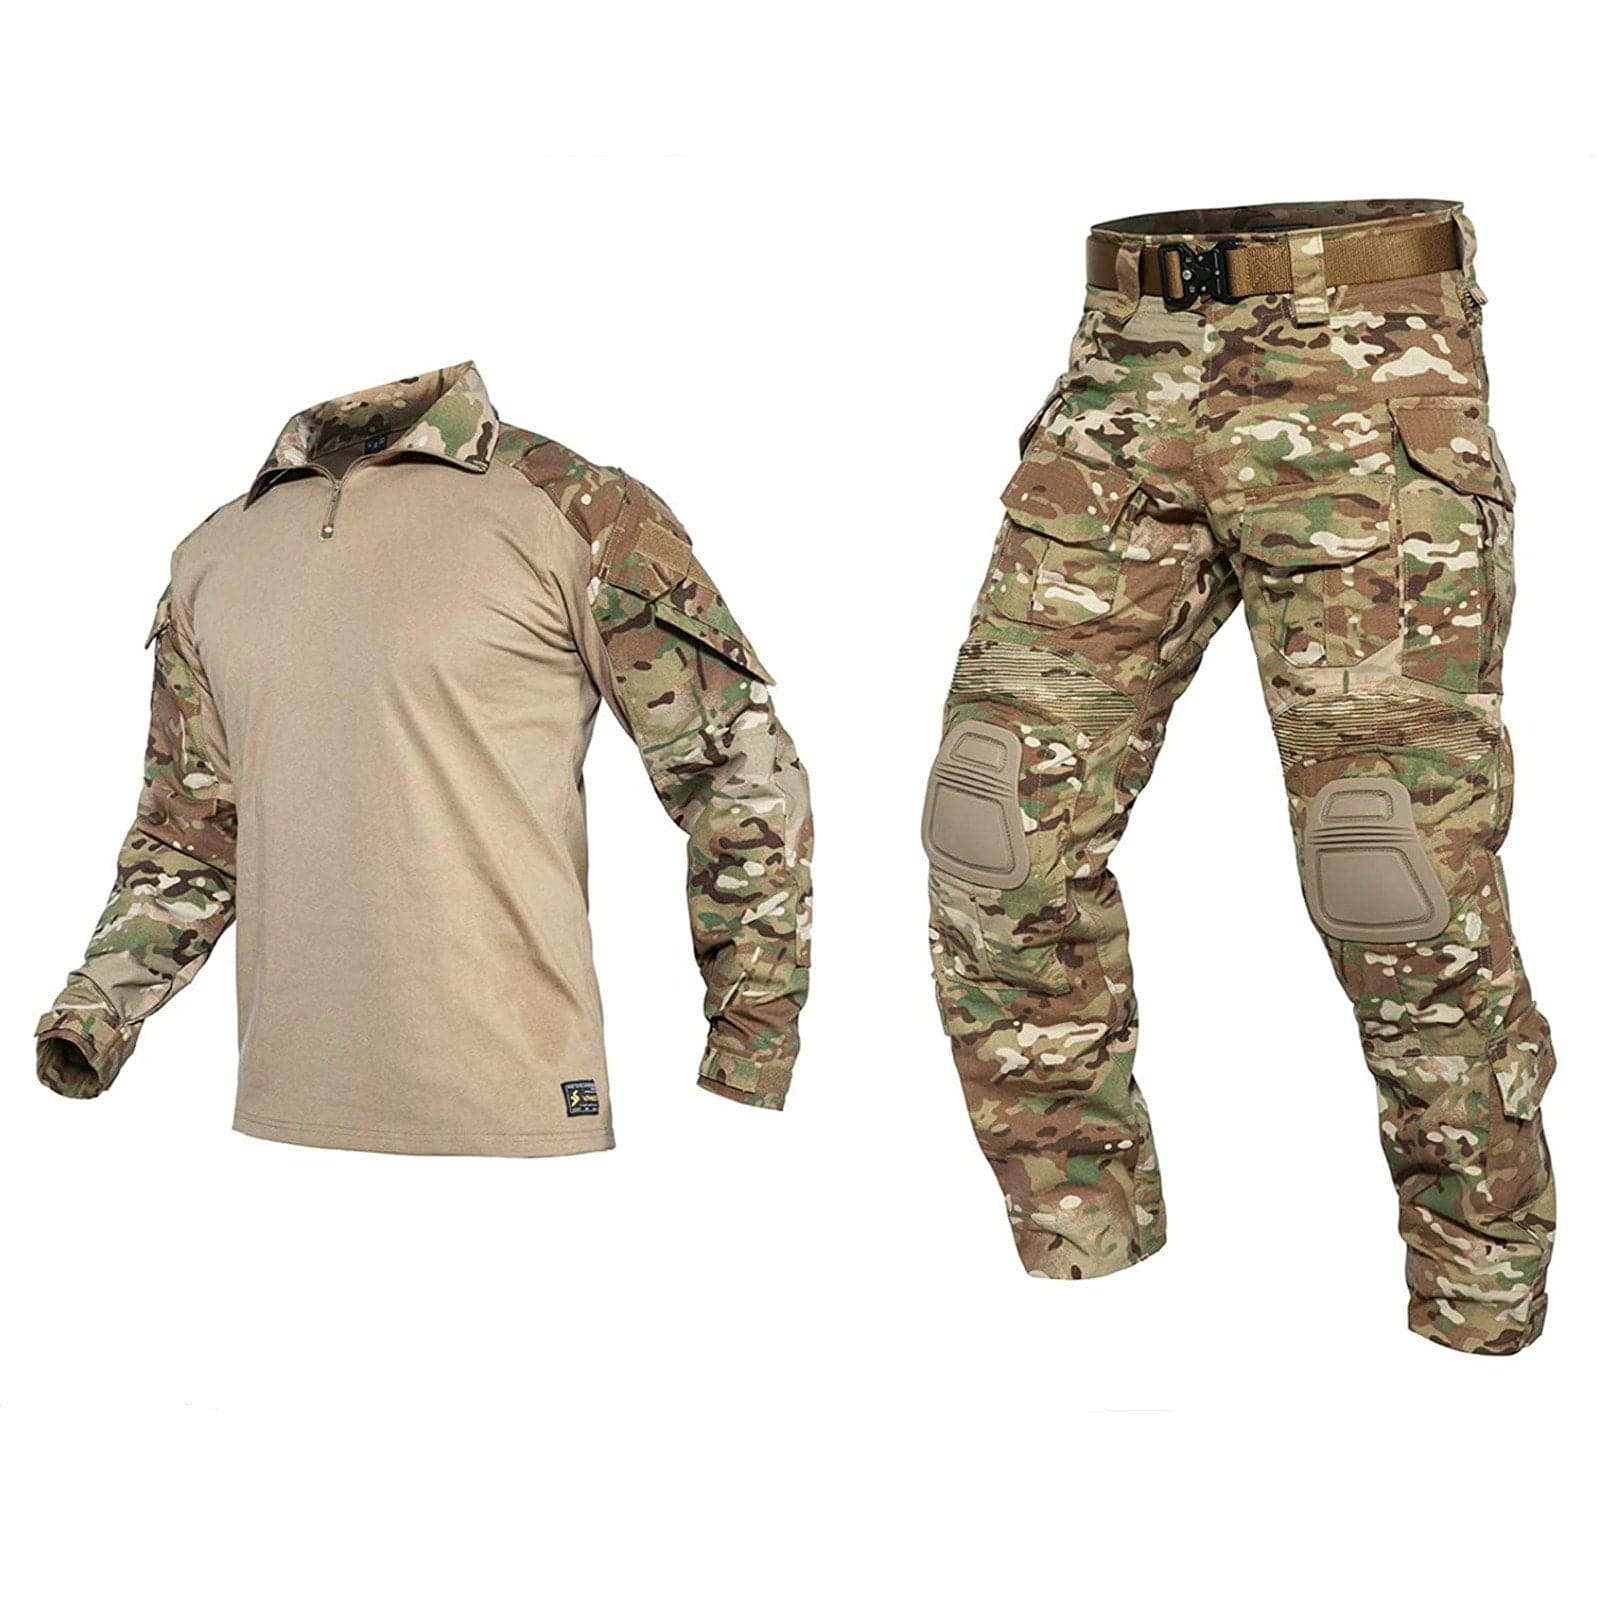 G3 Camouflage Clothing Suit With Knee Pads For Men#N#– ANTARCTICA Outdoors